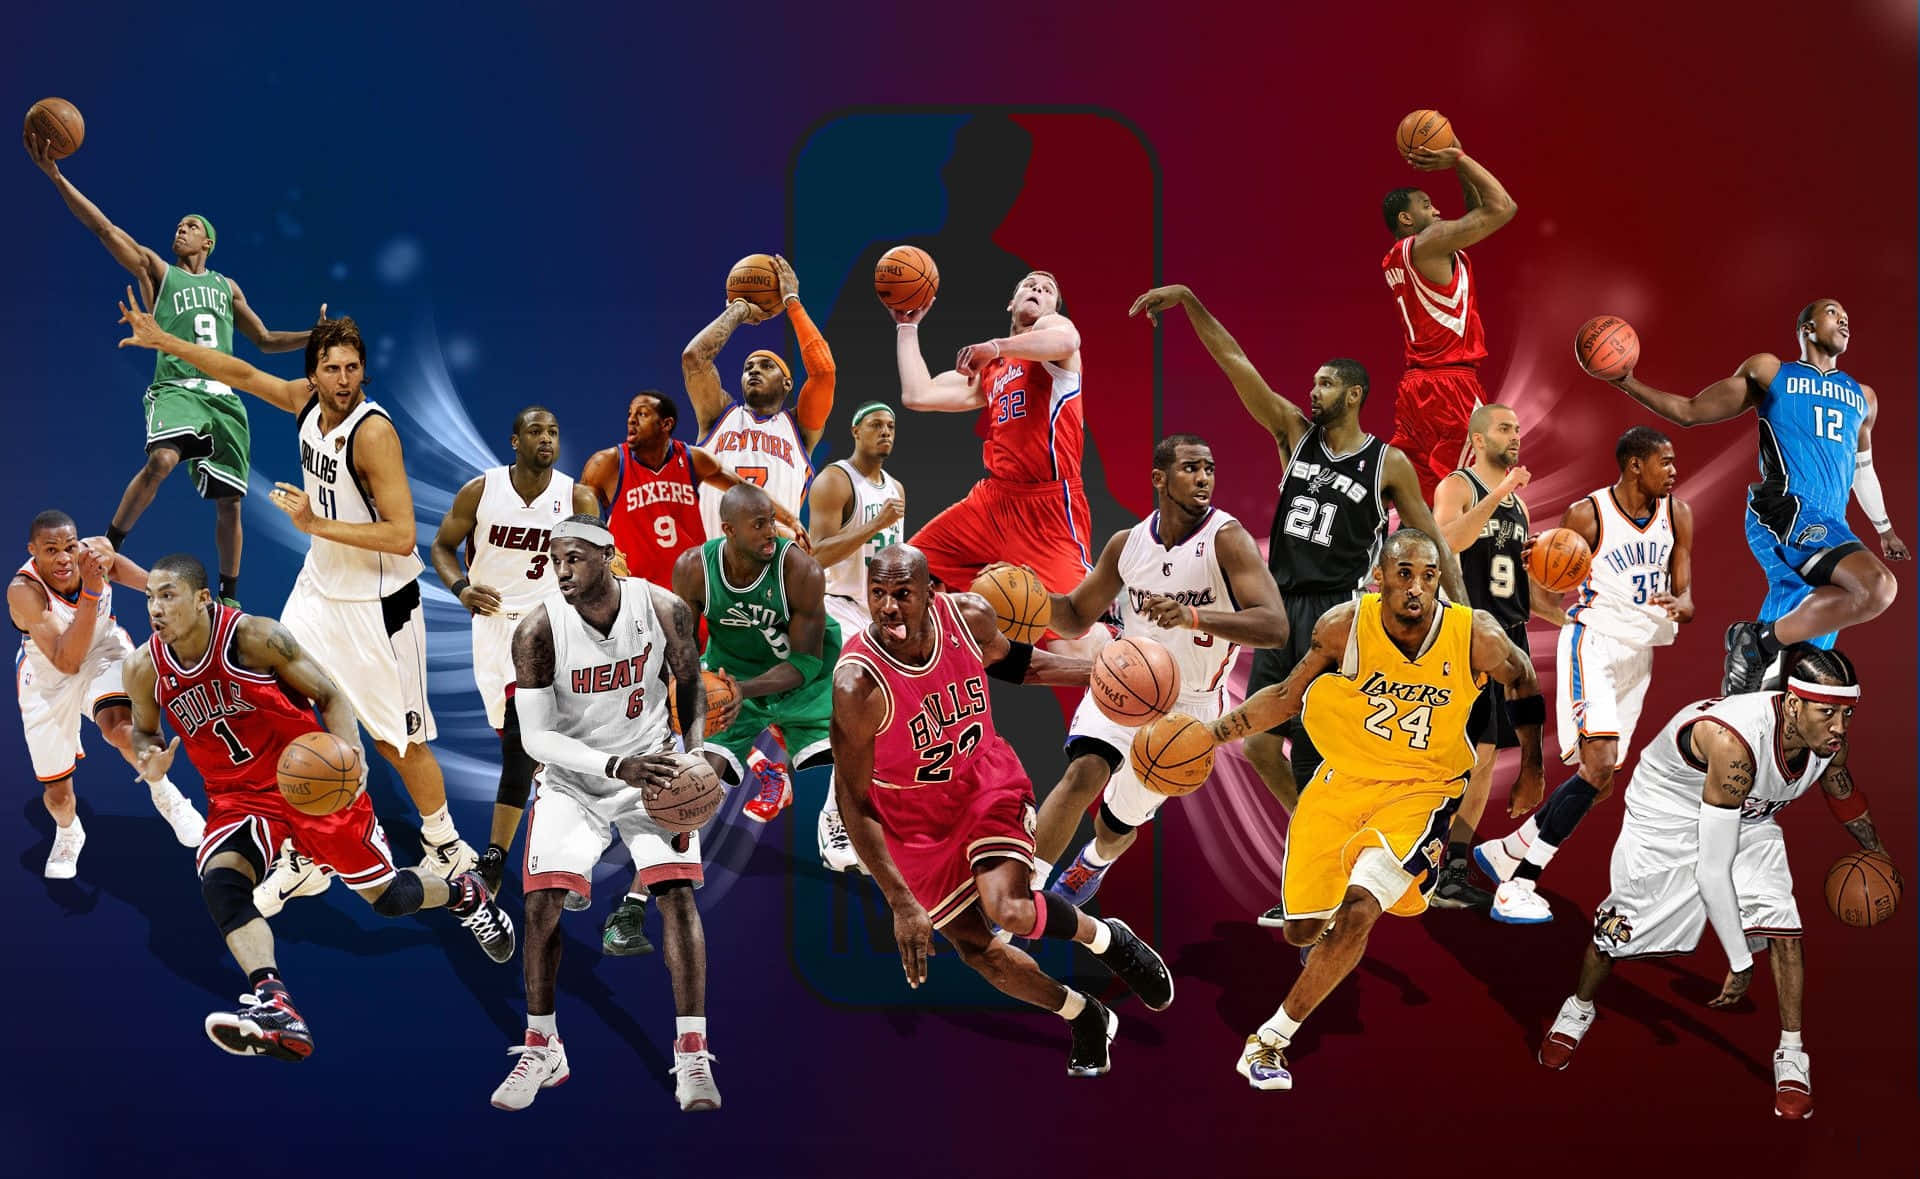 Time marches on, but classic basketball never goes out of style. Wallpaper